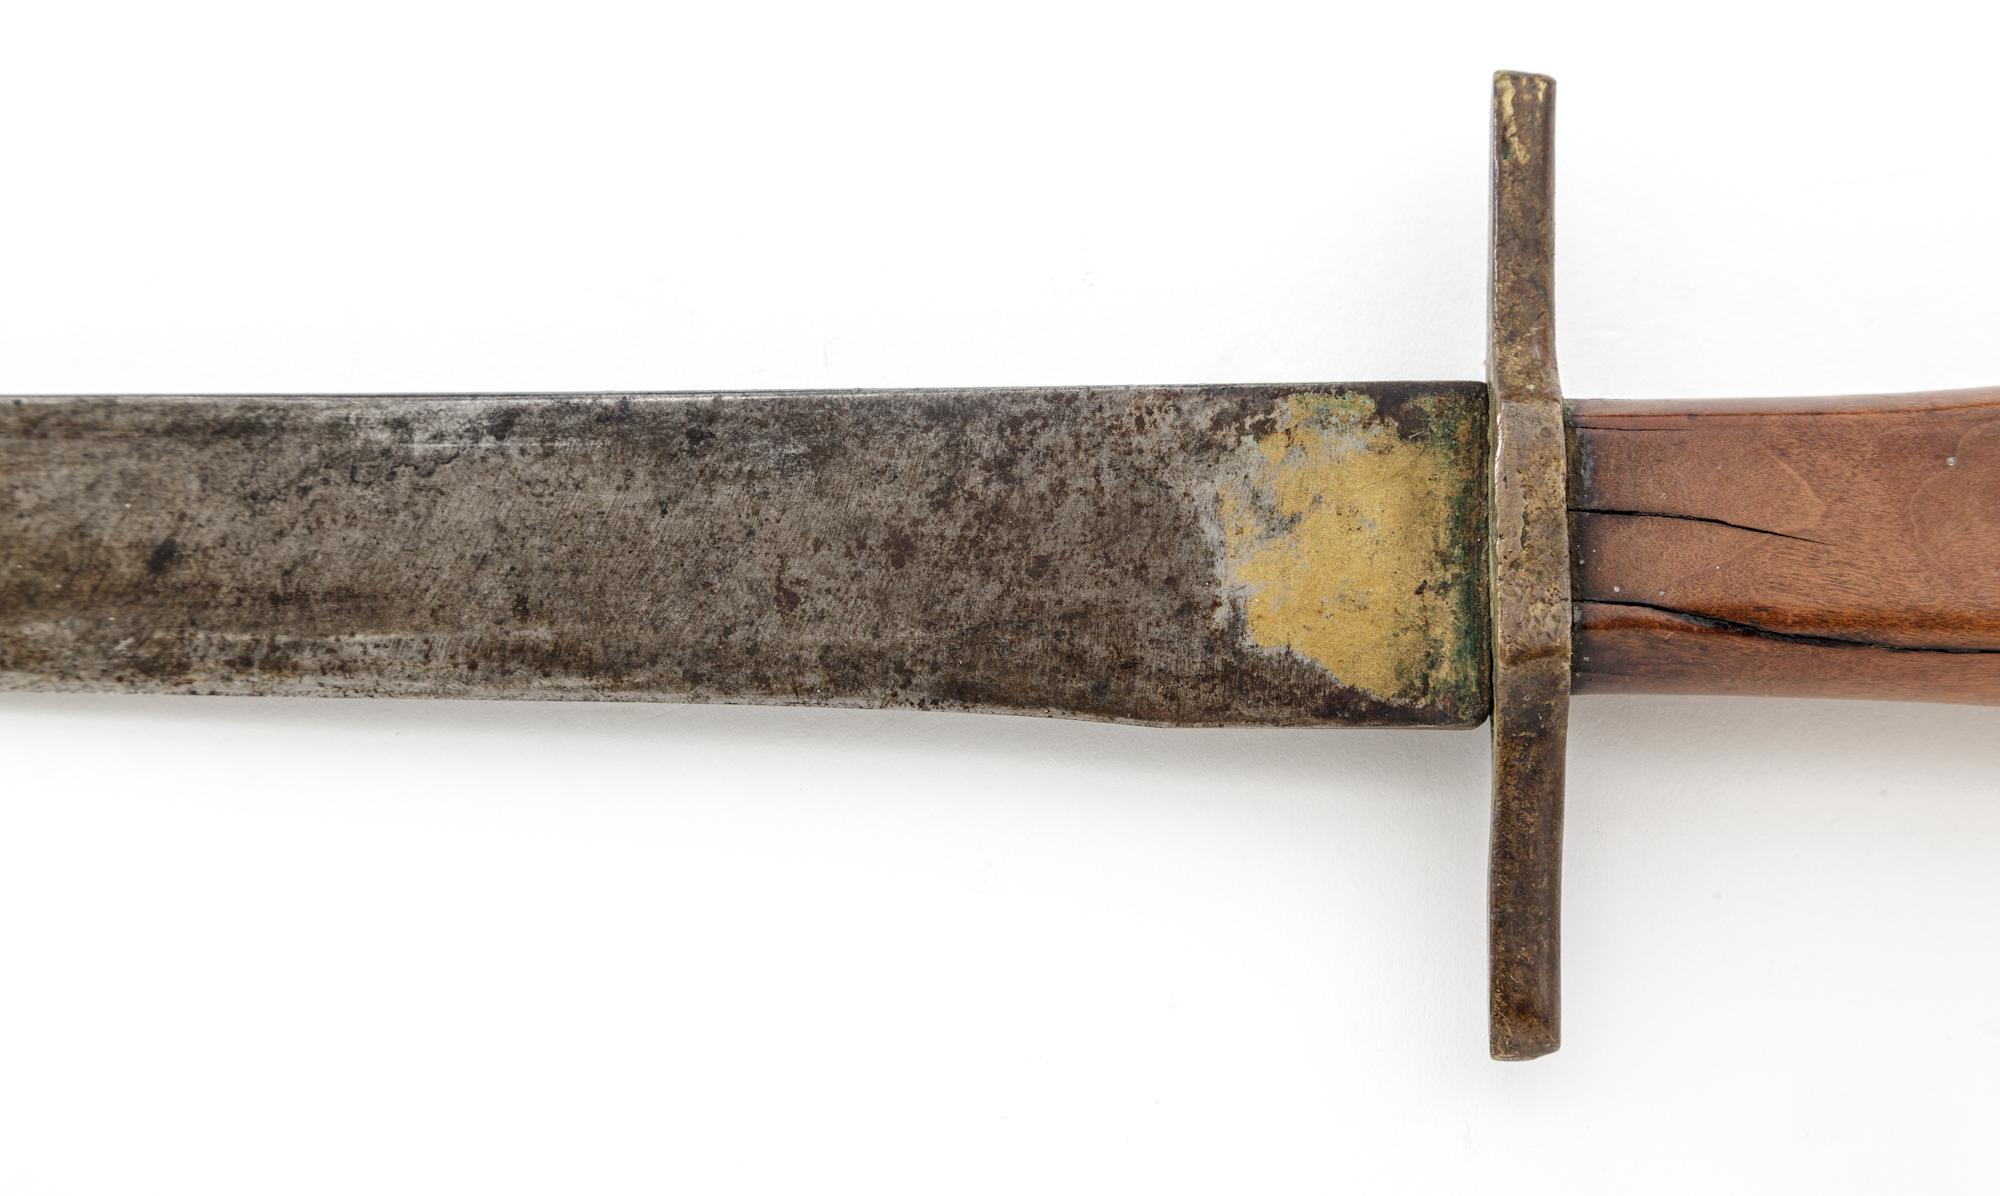 Confederate Bowie Knife